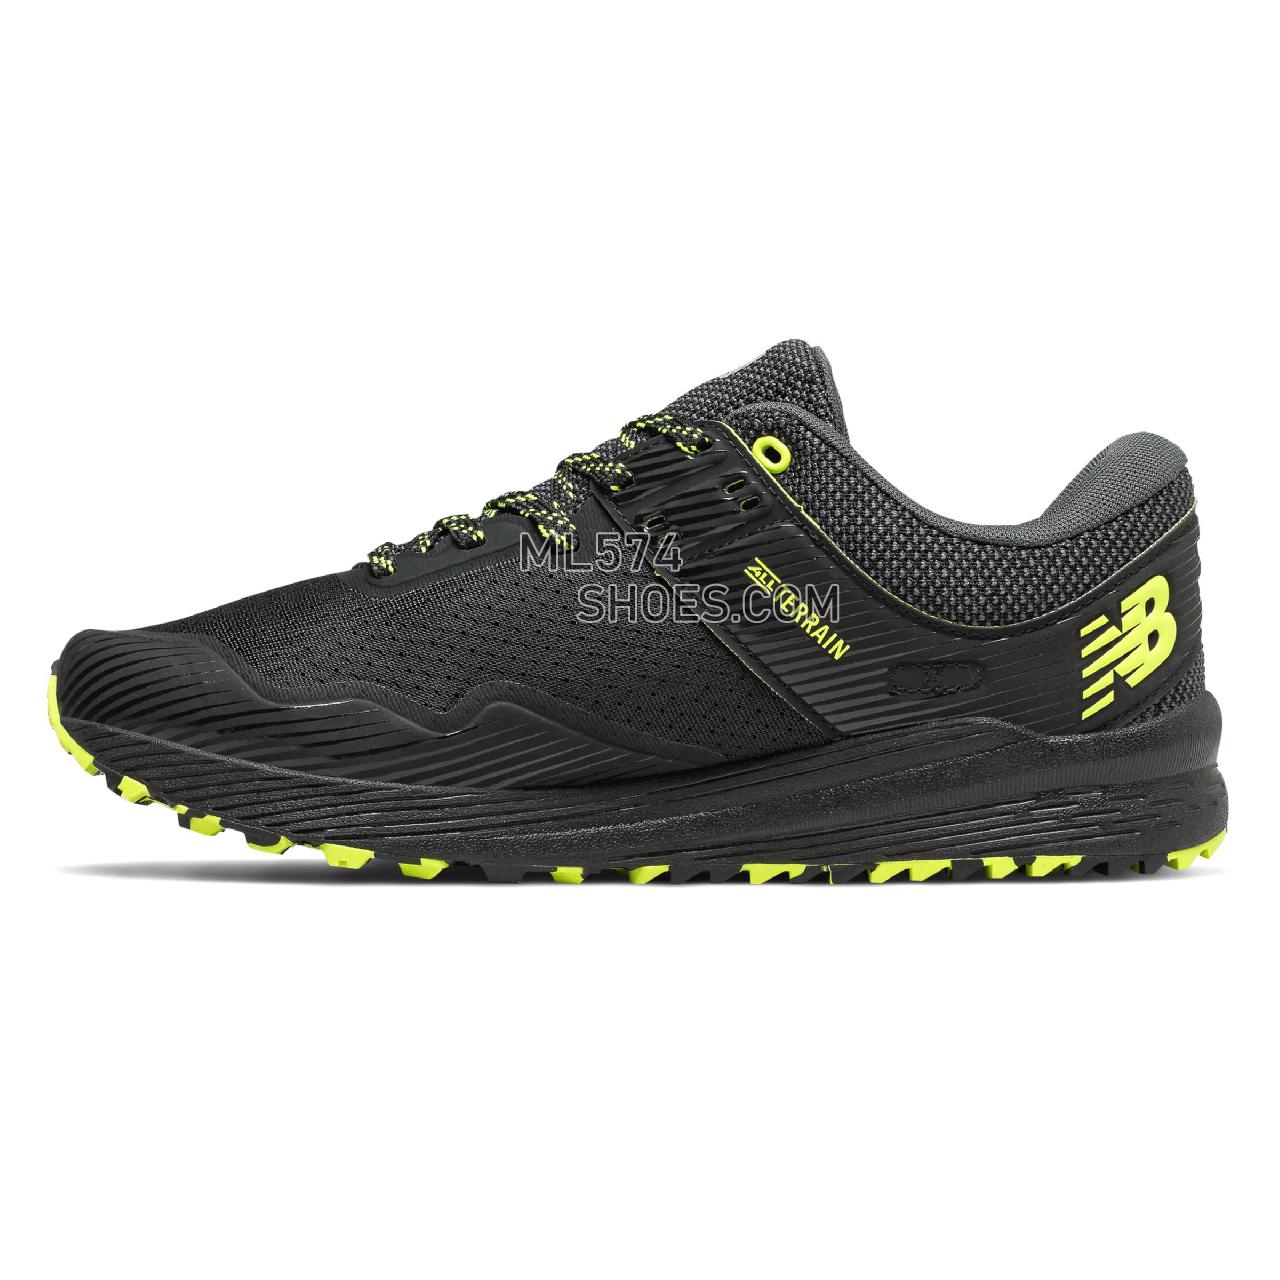 New Balance FuelCore NITRELv2 - Men's 2 - Running Black with Magnet and Hi-Lite - MTNTRLB2